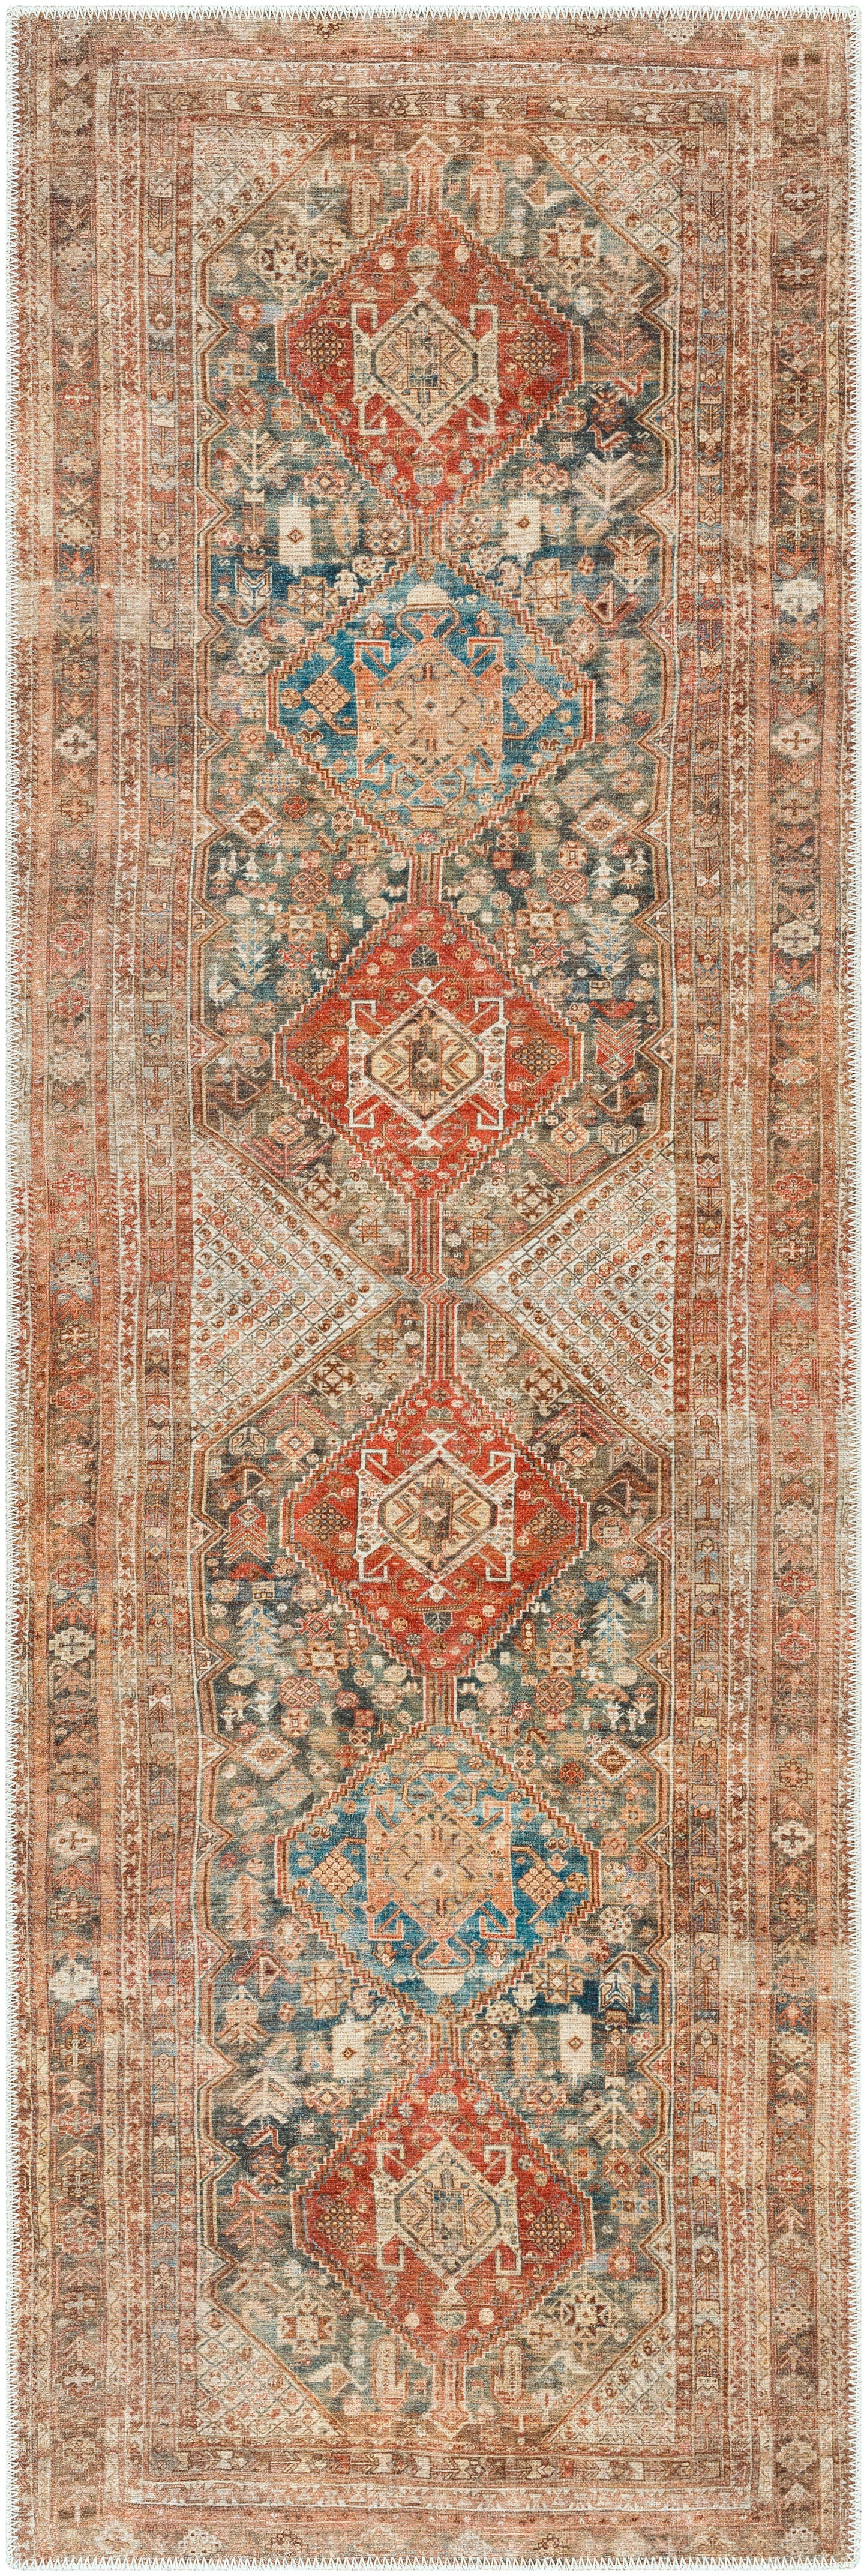 Amelie 30790 Machine Woven Synthetic Blend Indoor Area Rug by Surya Rugs